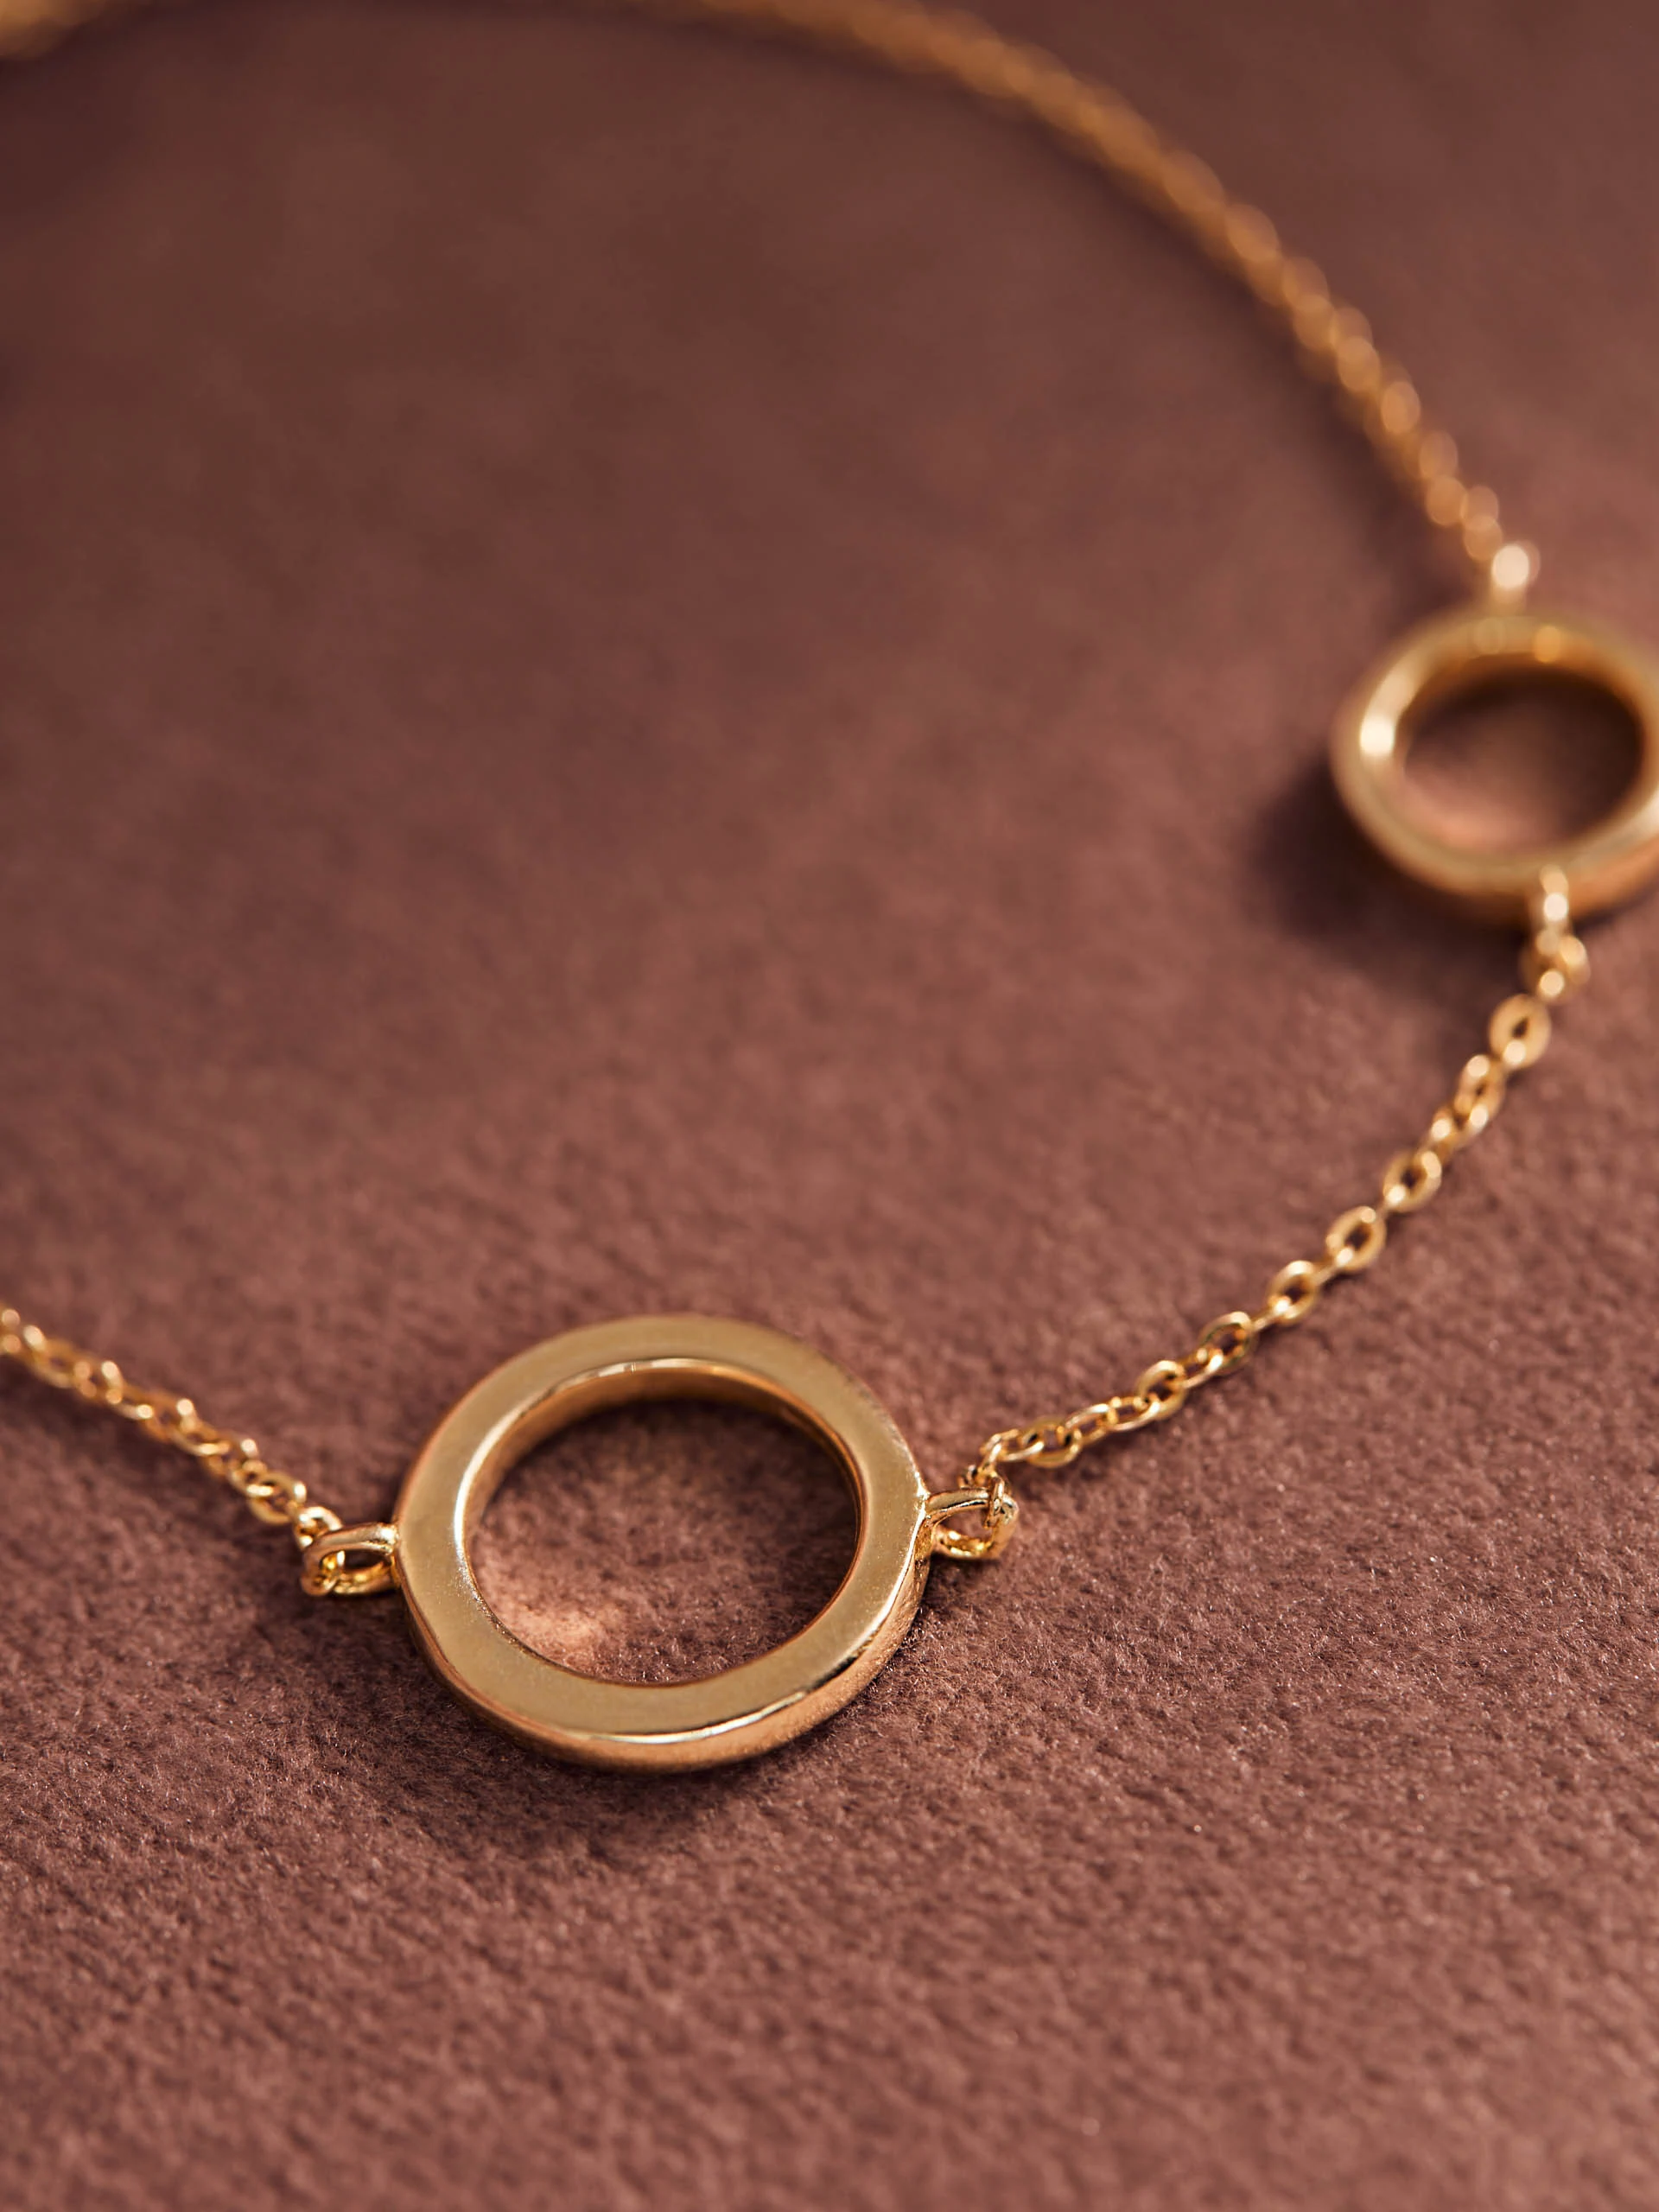 GOLD-PLATED BRACELET WITH PENDANT